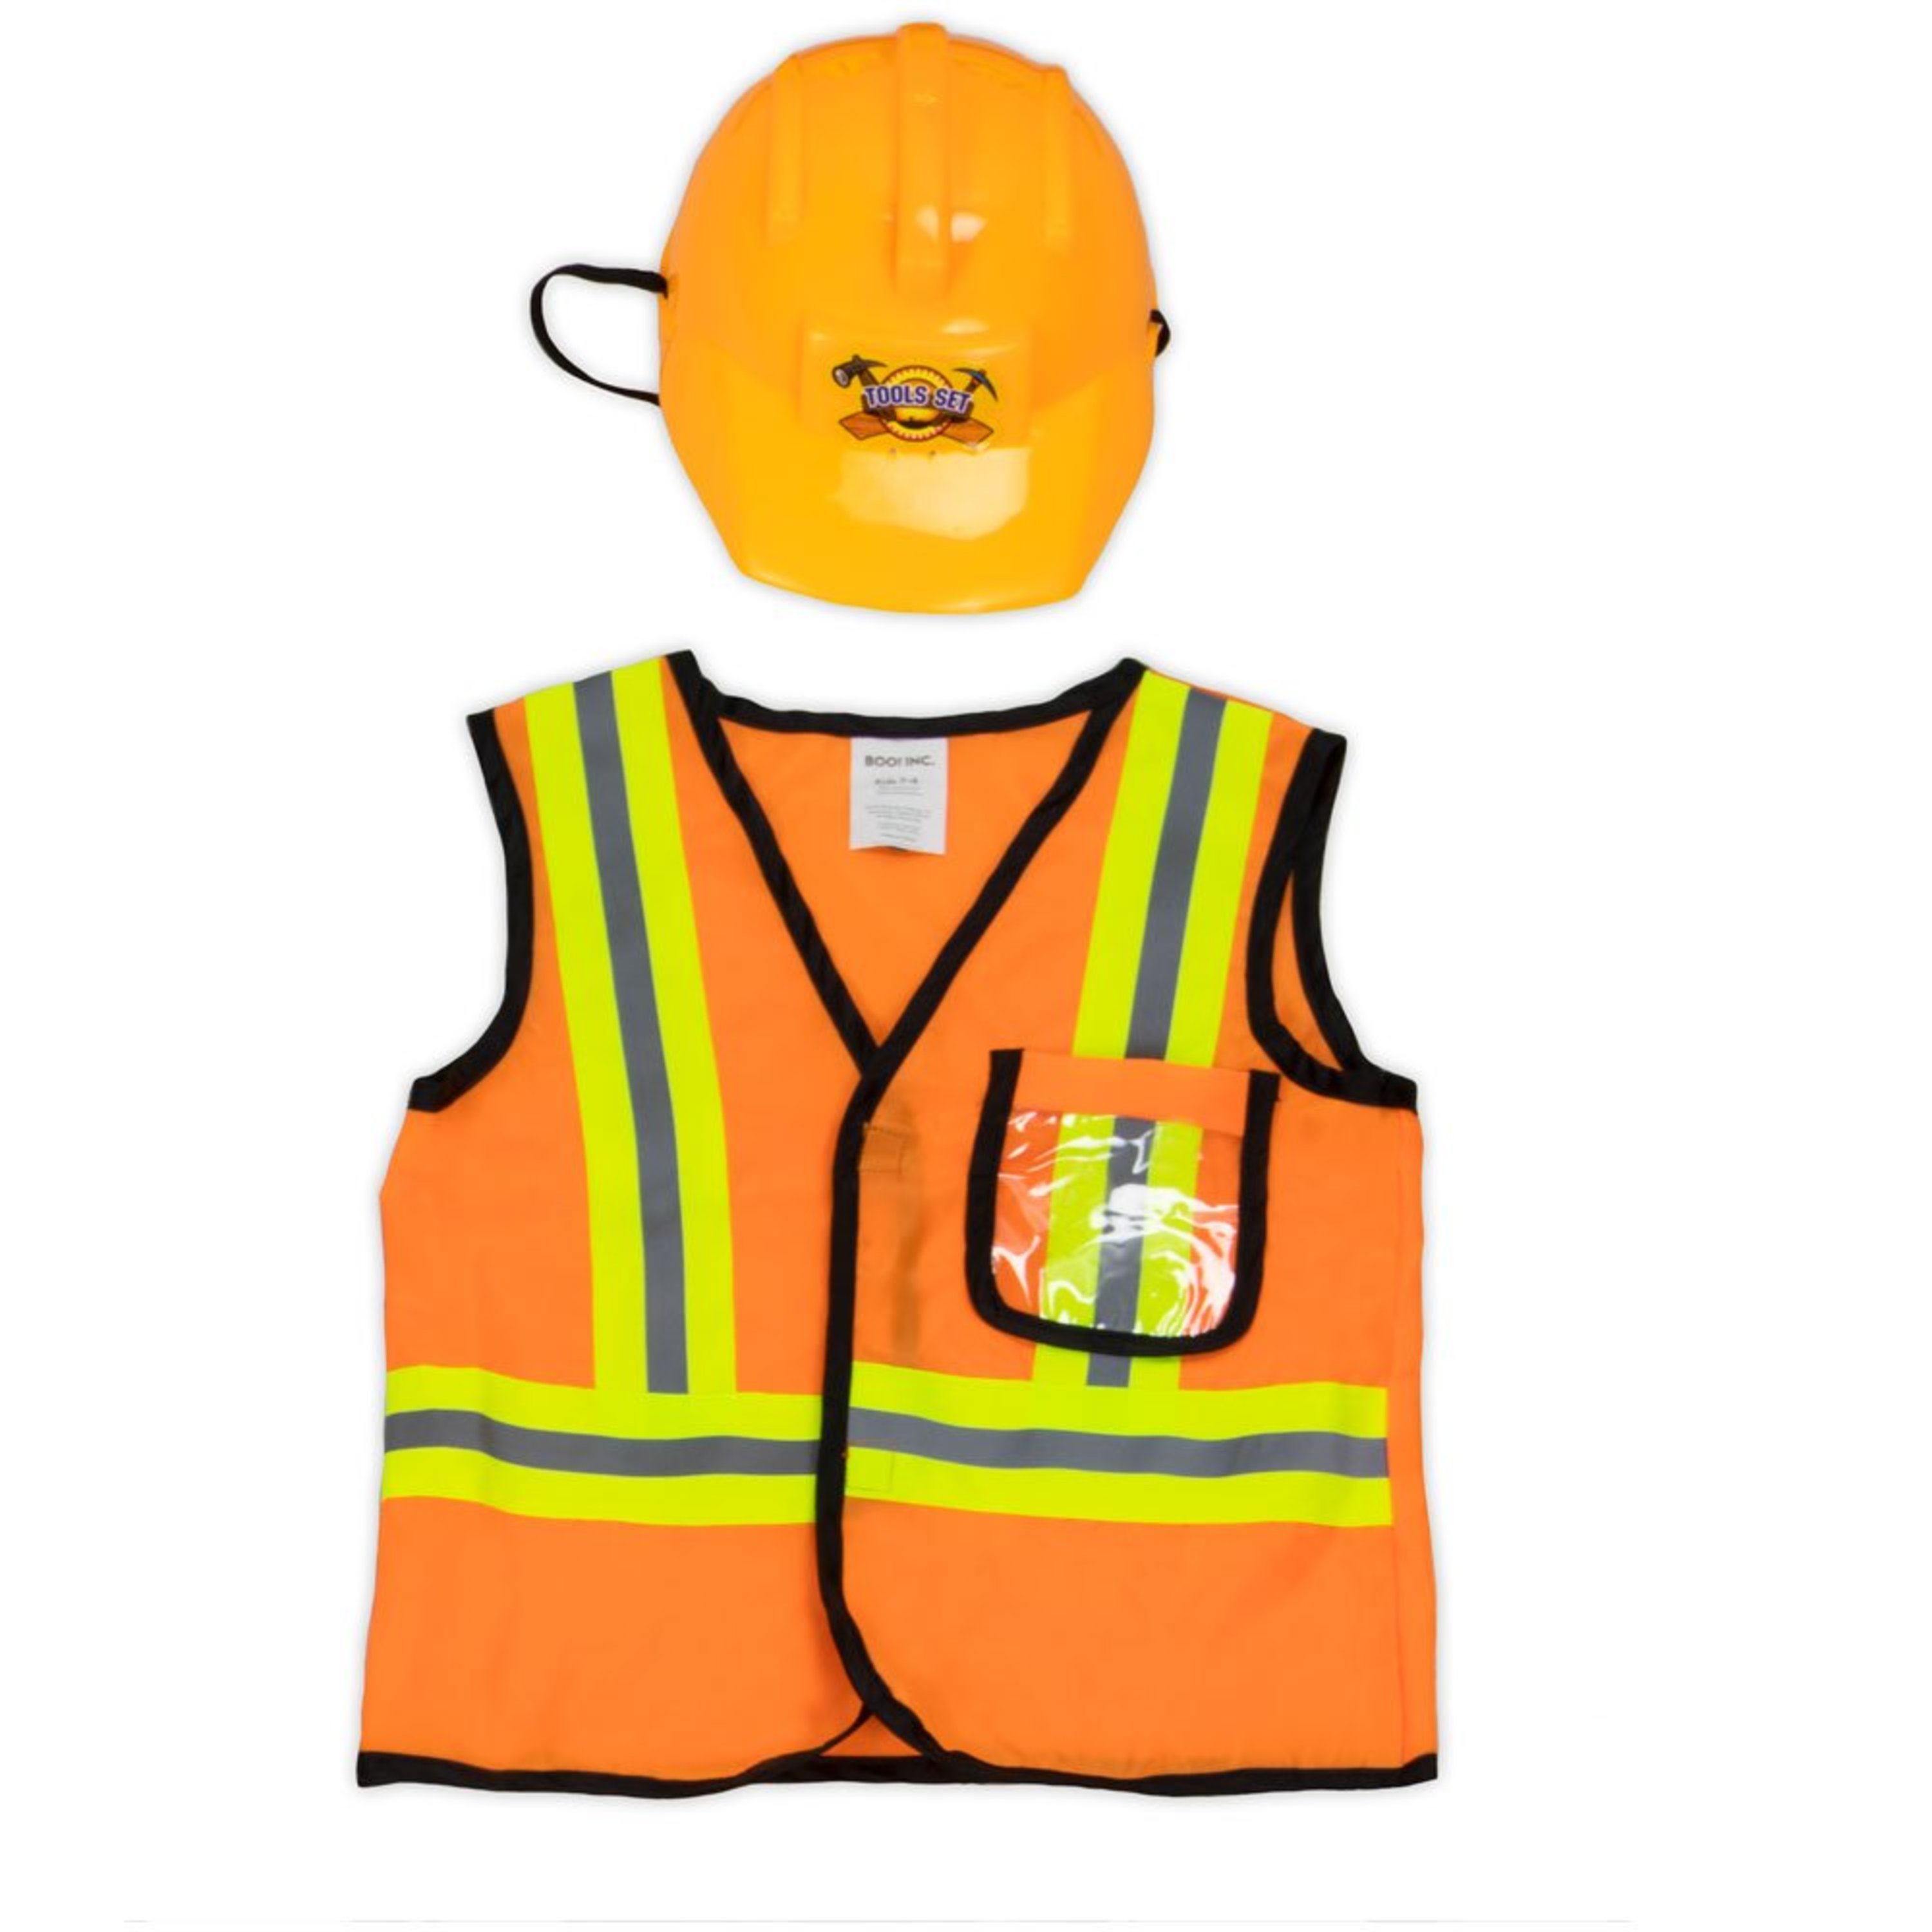 Construction Worker Children's Halloween Dress Up Roleplay Costume YS 3-4 - image 4 of 7